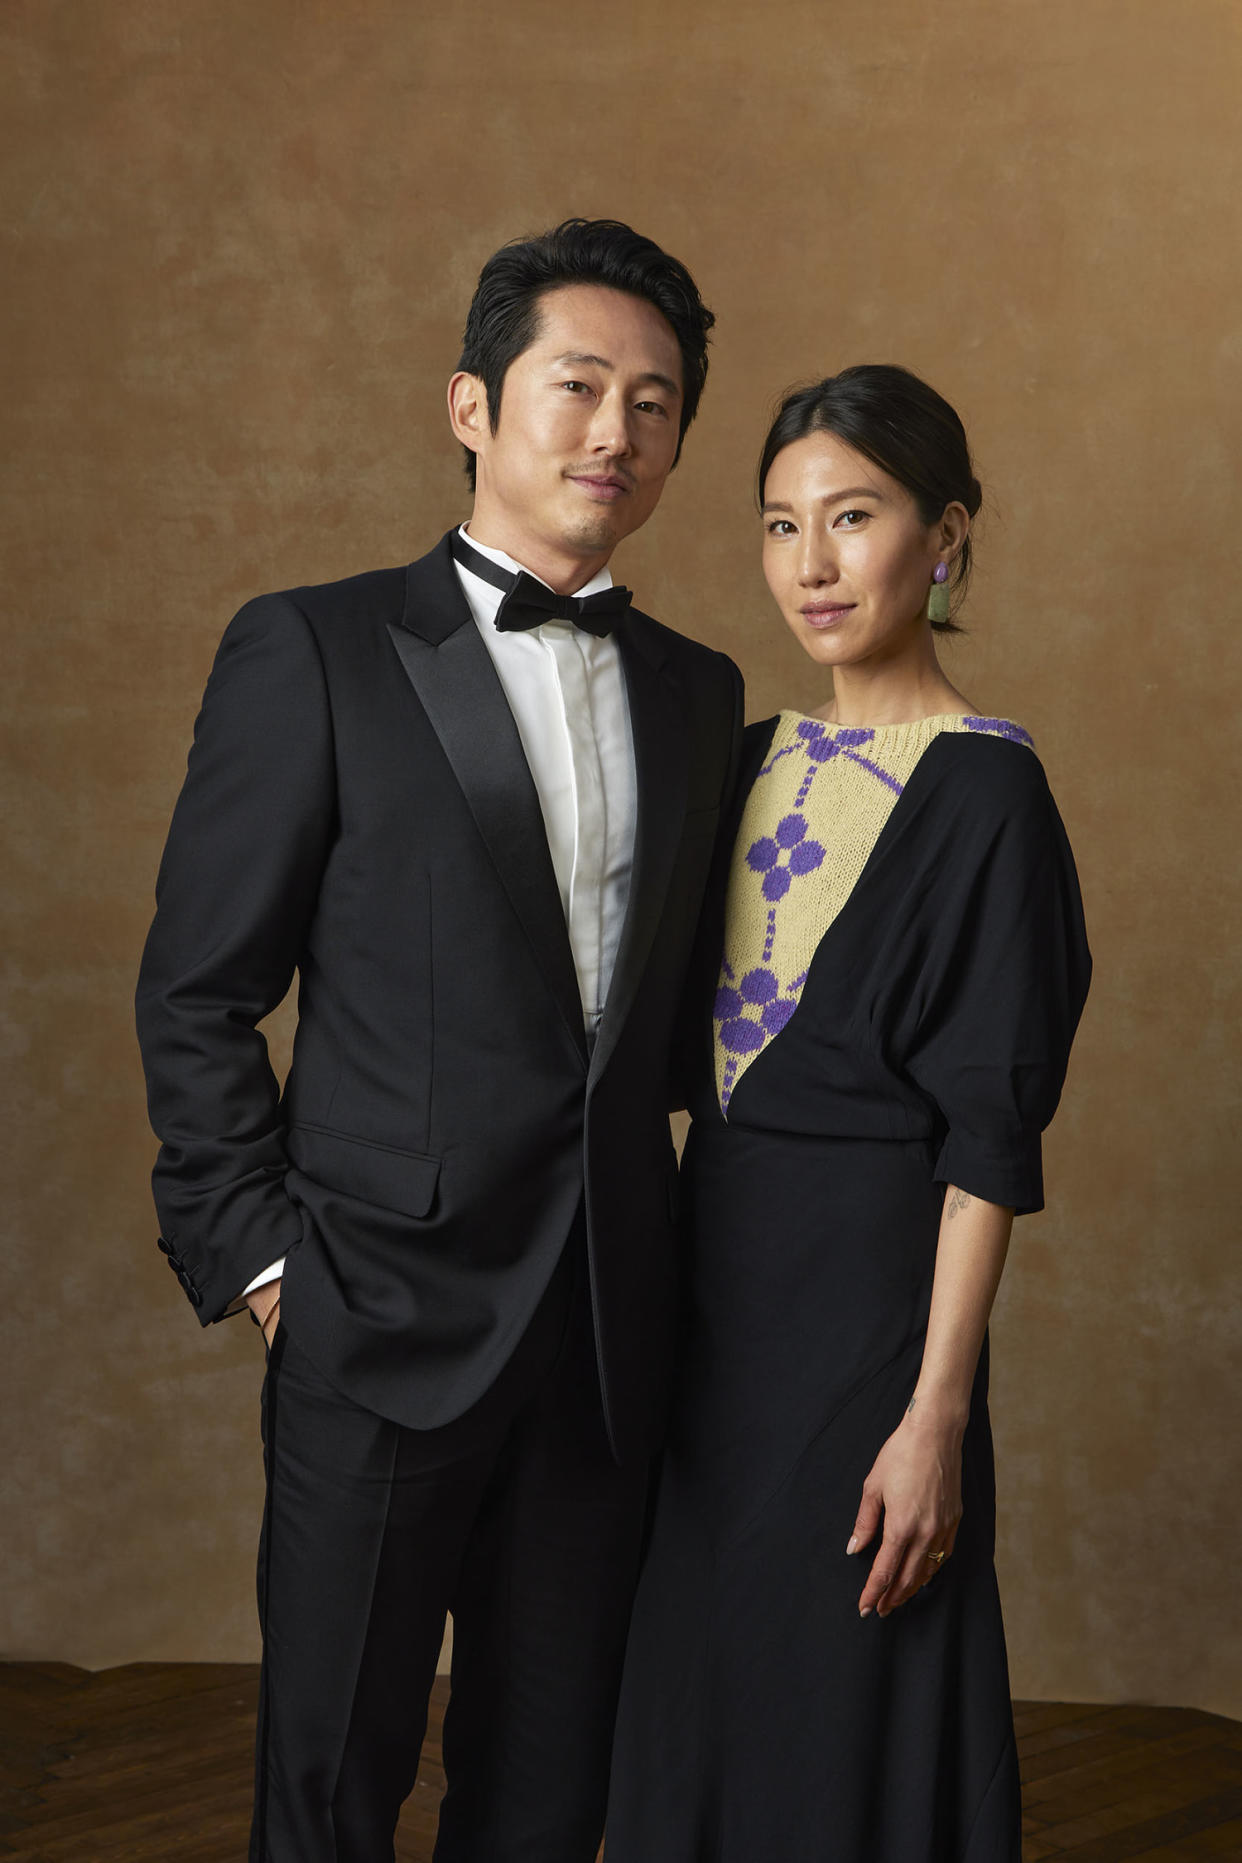 Steven Yeun and Joana Pak at the portrait booth at the 81st Golden Globe Awards held at the Beverly Hilton Hotel on January 7, 2024 in Beverly Hills, California.  (Dan Doperalski / Golden Globes 2024 via Getty Images)